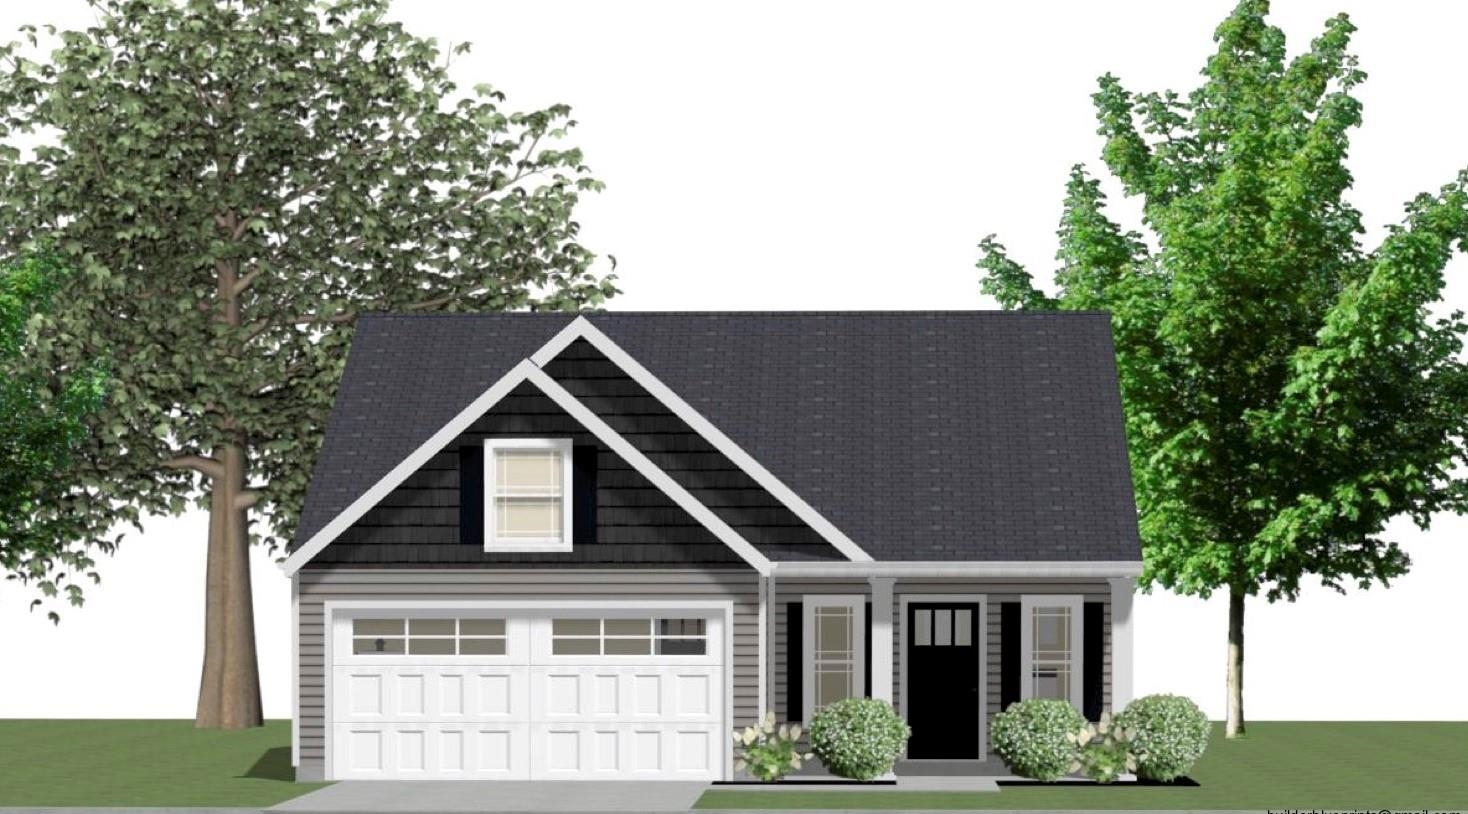 This is the PACIFIC floorplan. Open concept 3 bedroom 2 bathroom home, 18x16 upstairs bonus room, vinyl flooring in all common areas, gas fireplace, 12x12 back patio. Located in the NEW Elliott park community in Lyman just minutes from Spartanburg and Greenville. Call today for more info!